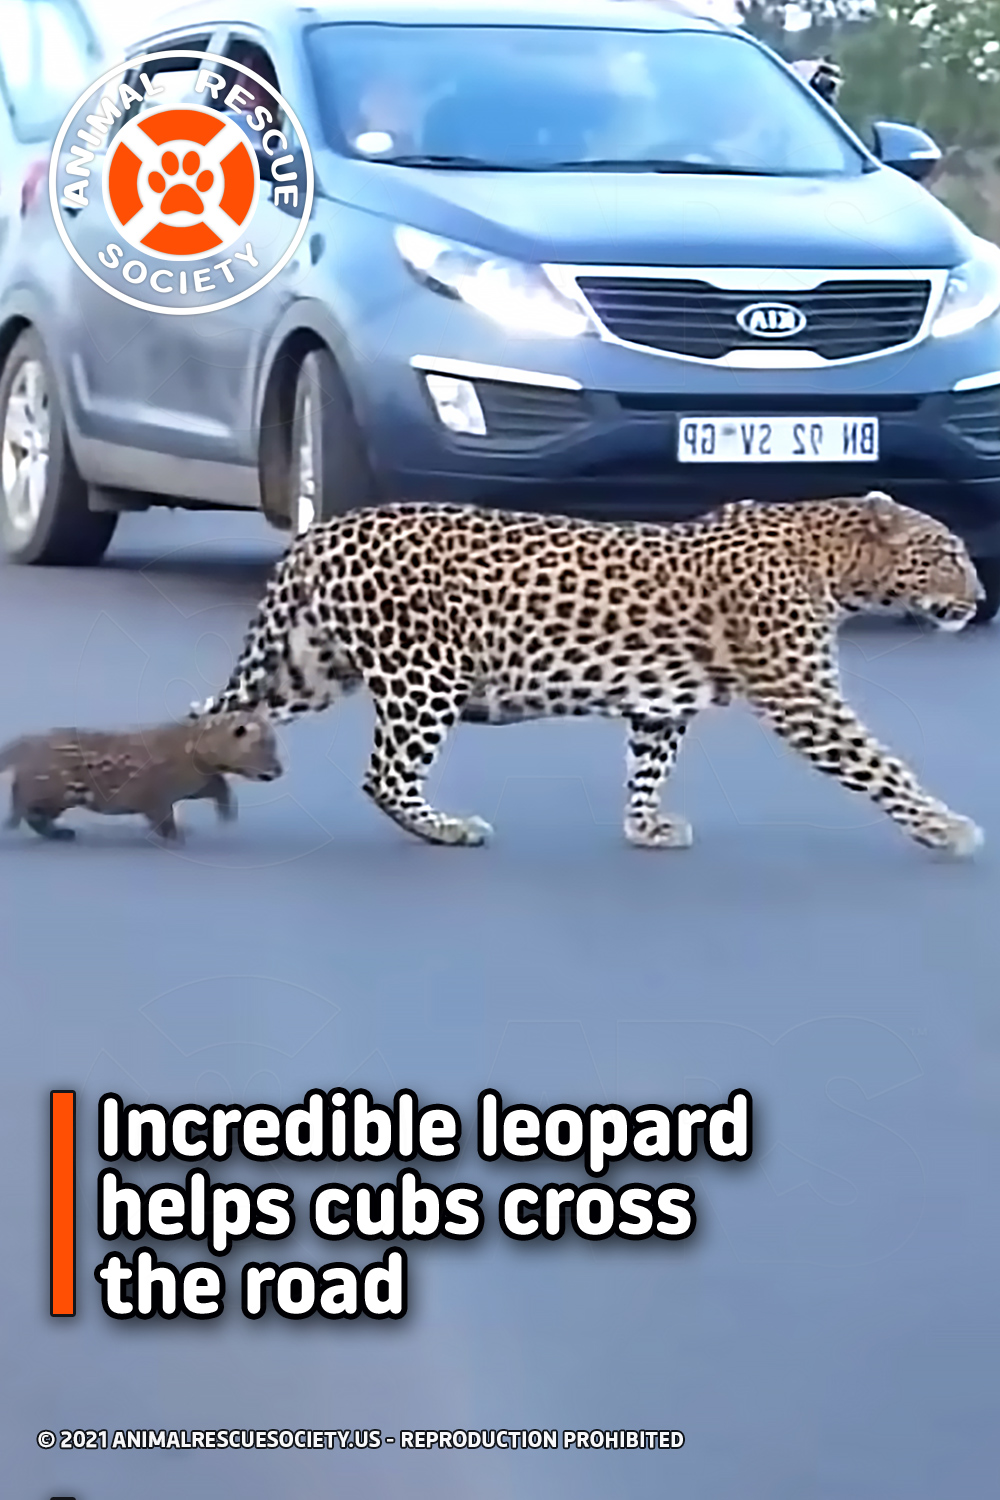 Incredible leopard helps cubs cross the road